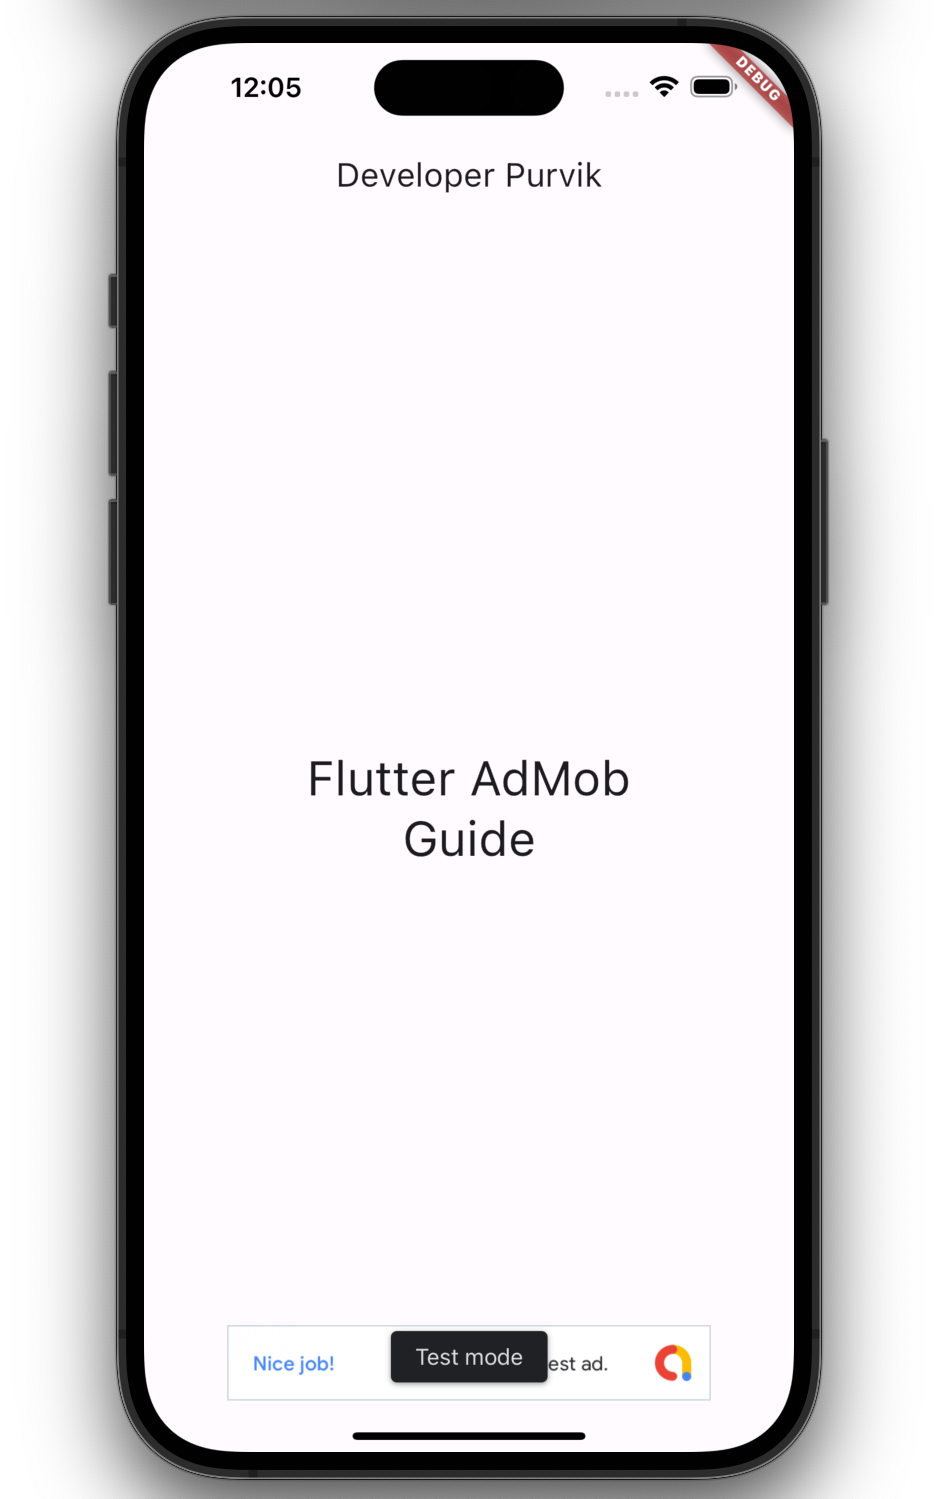 A screen shot of Flutter Mobile App Screen displaying Google Banner Ads loaded at the bottom